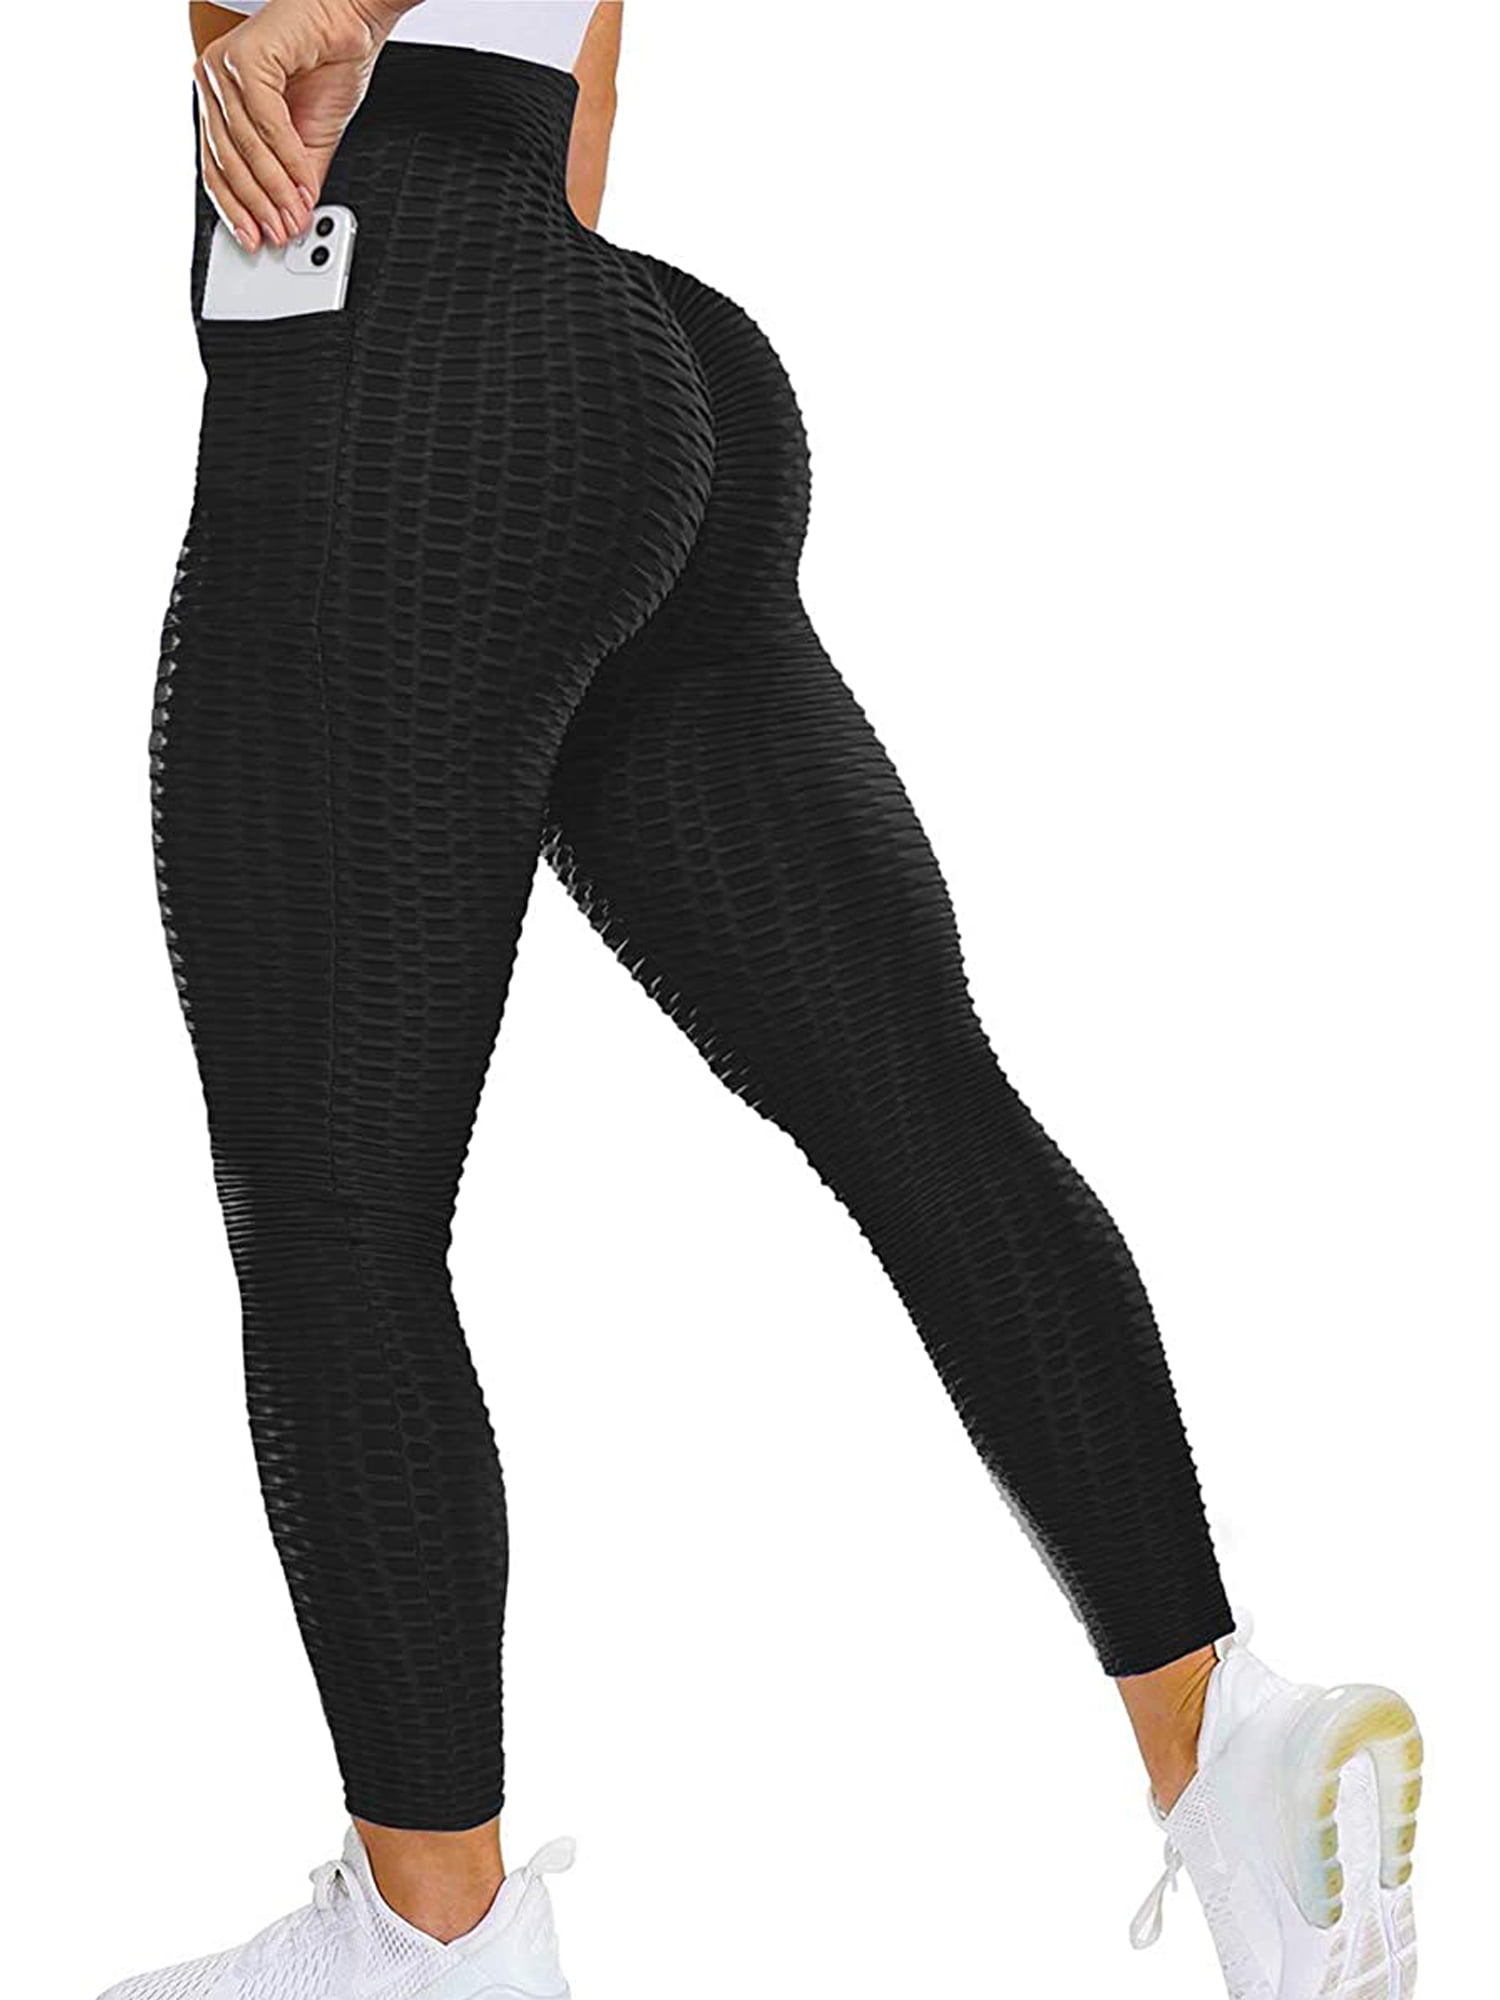 KIWI RATA Women's High Waist Workout Compression Seamless Fitness Yoga  Leggings Butt Lift Active Tights Stretch Pants